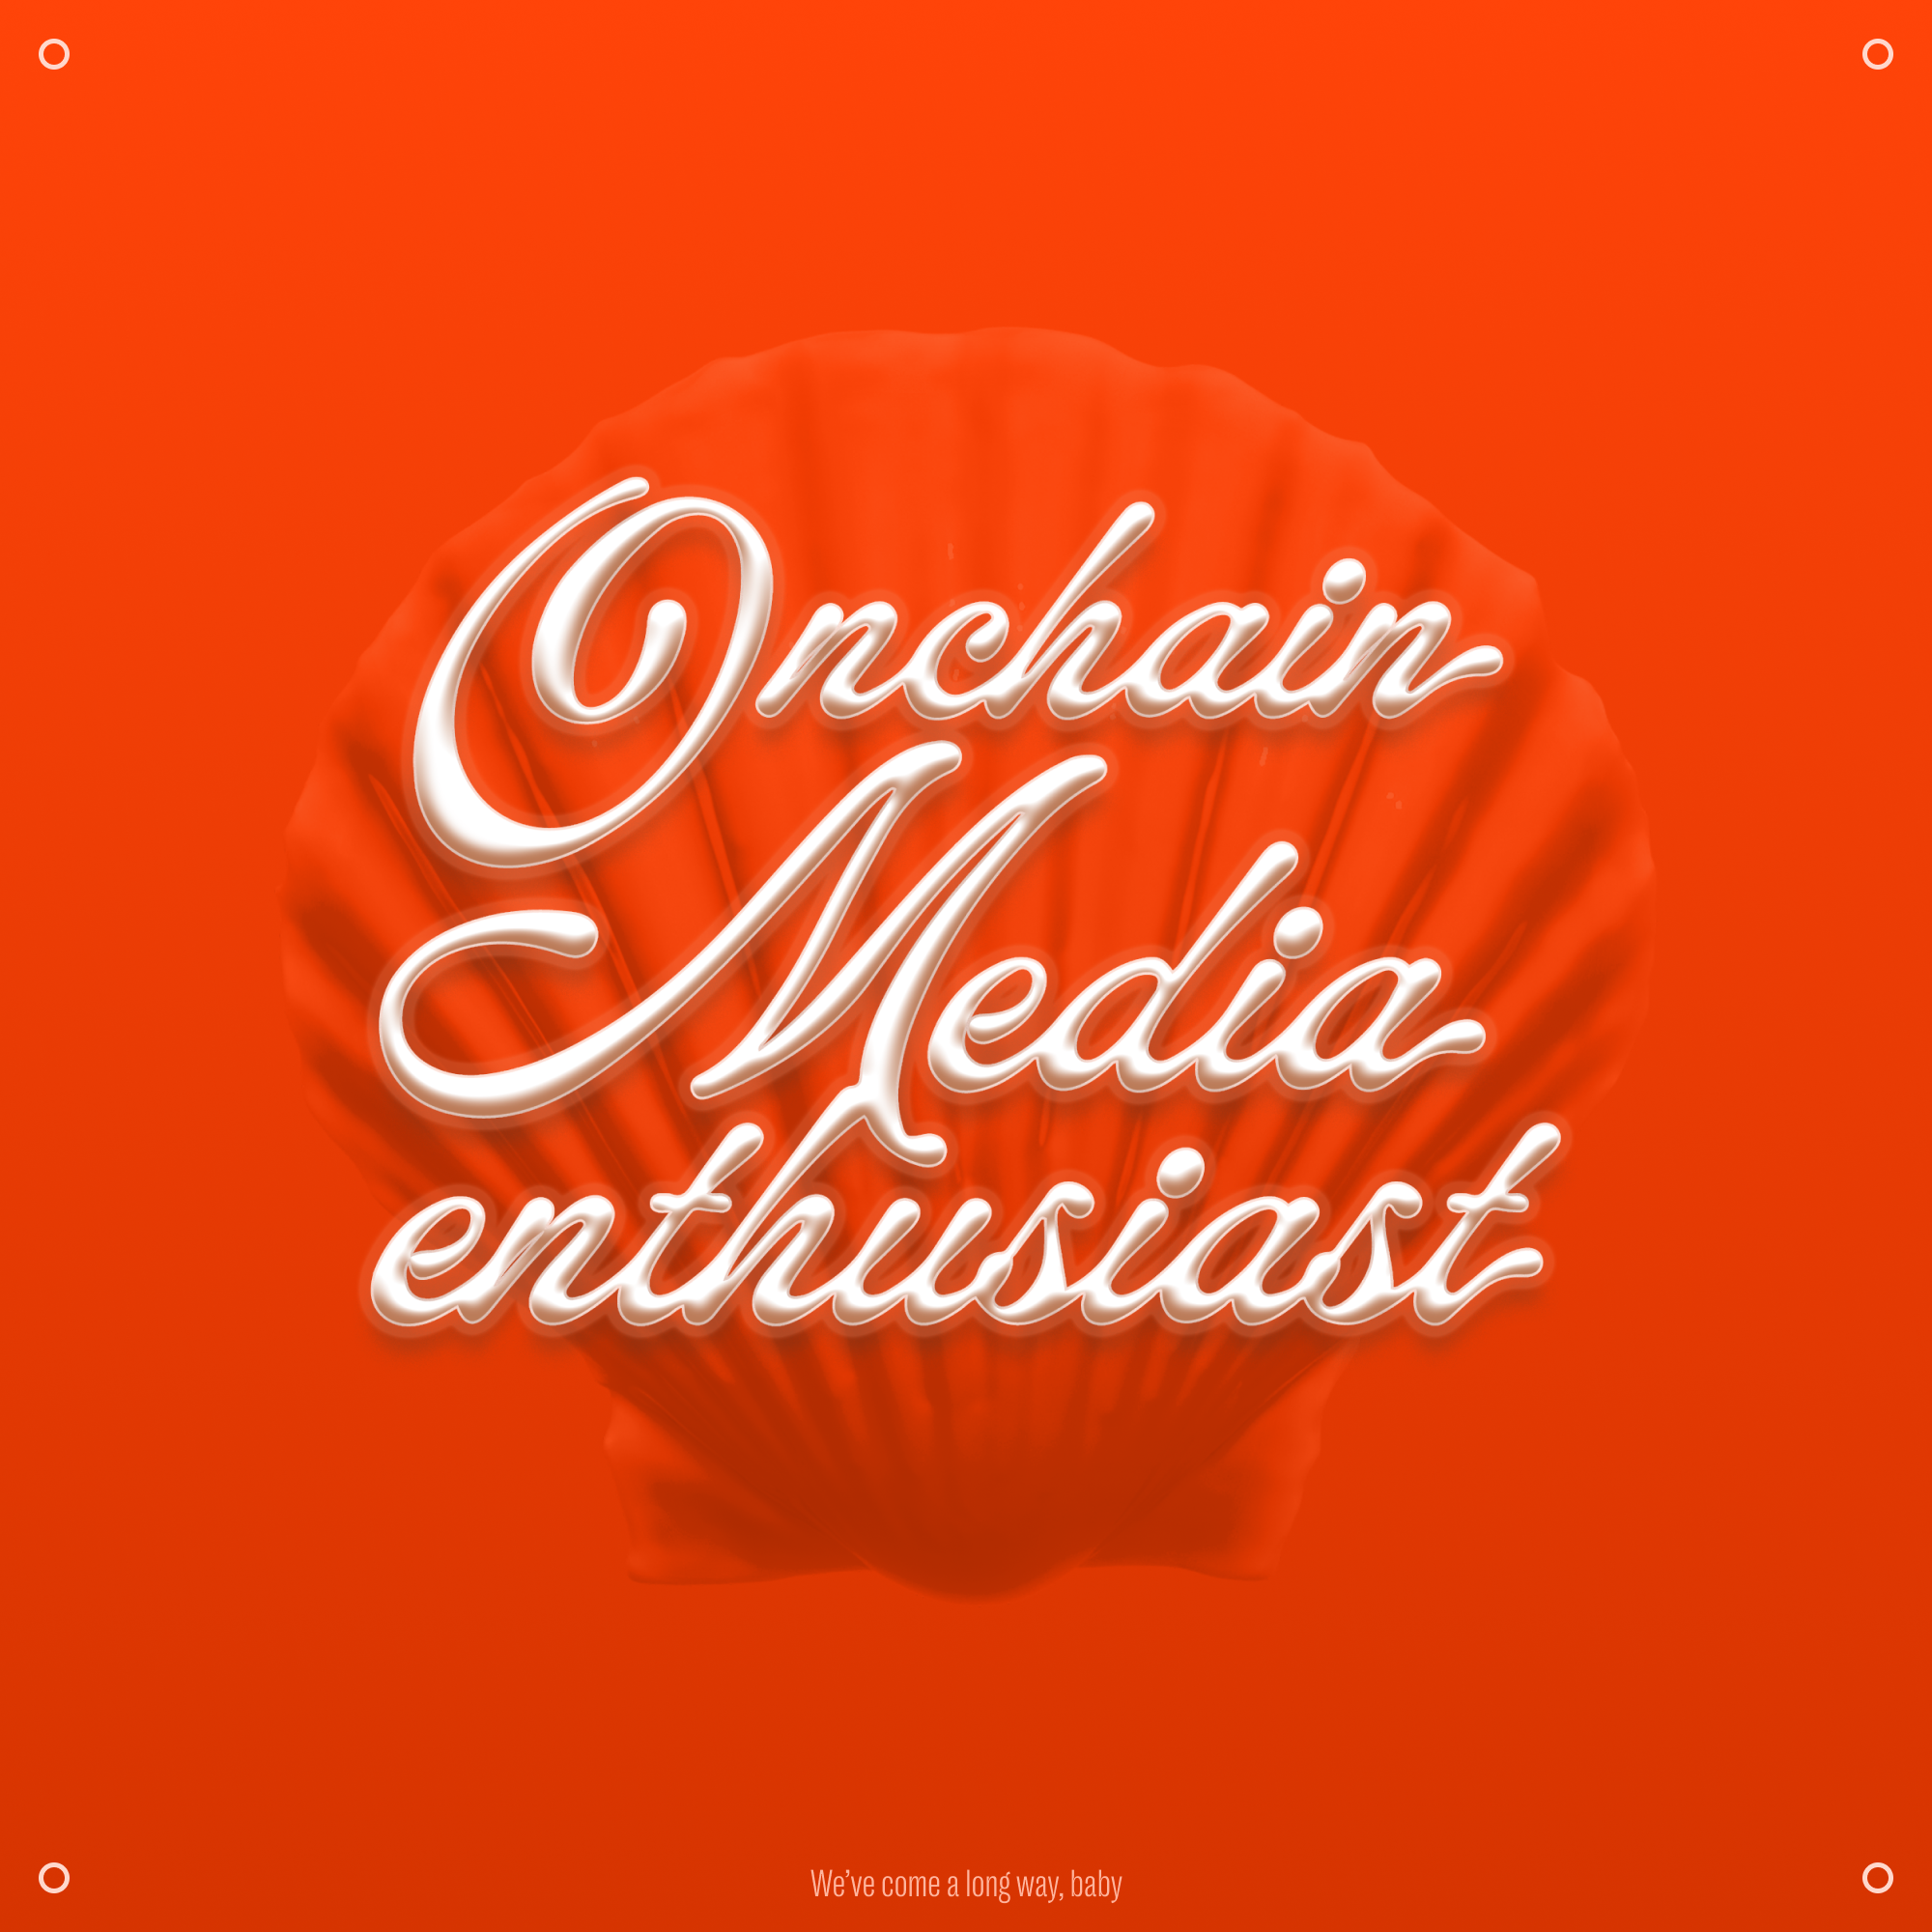 Onchain Media Enthusiast — We've come a long way, baby